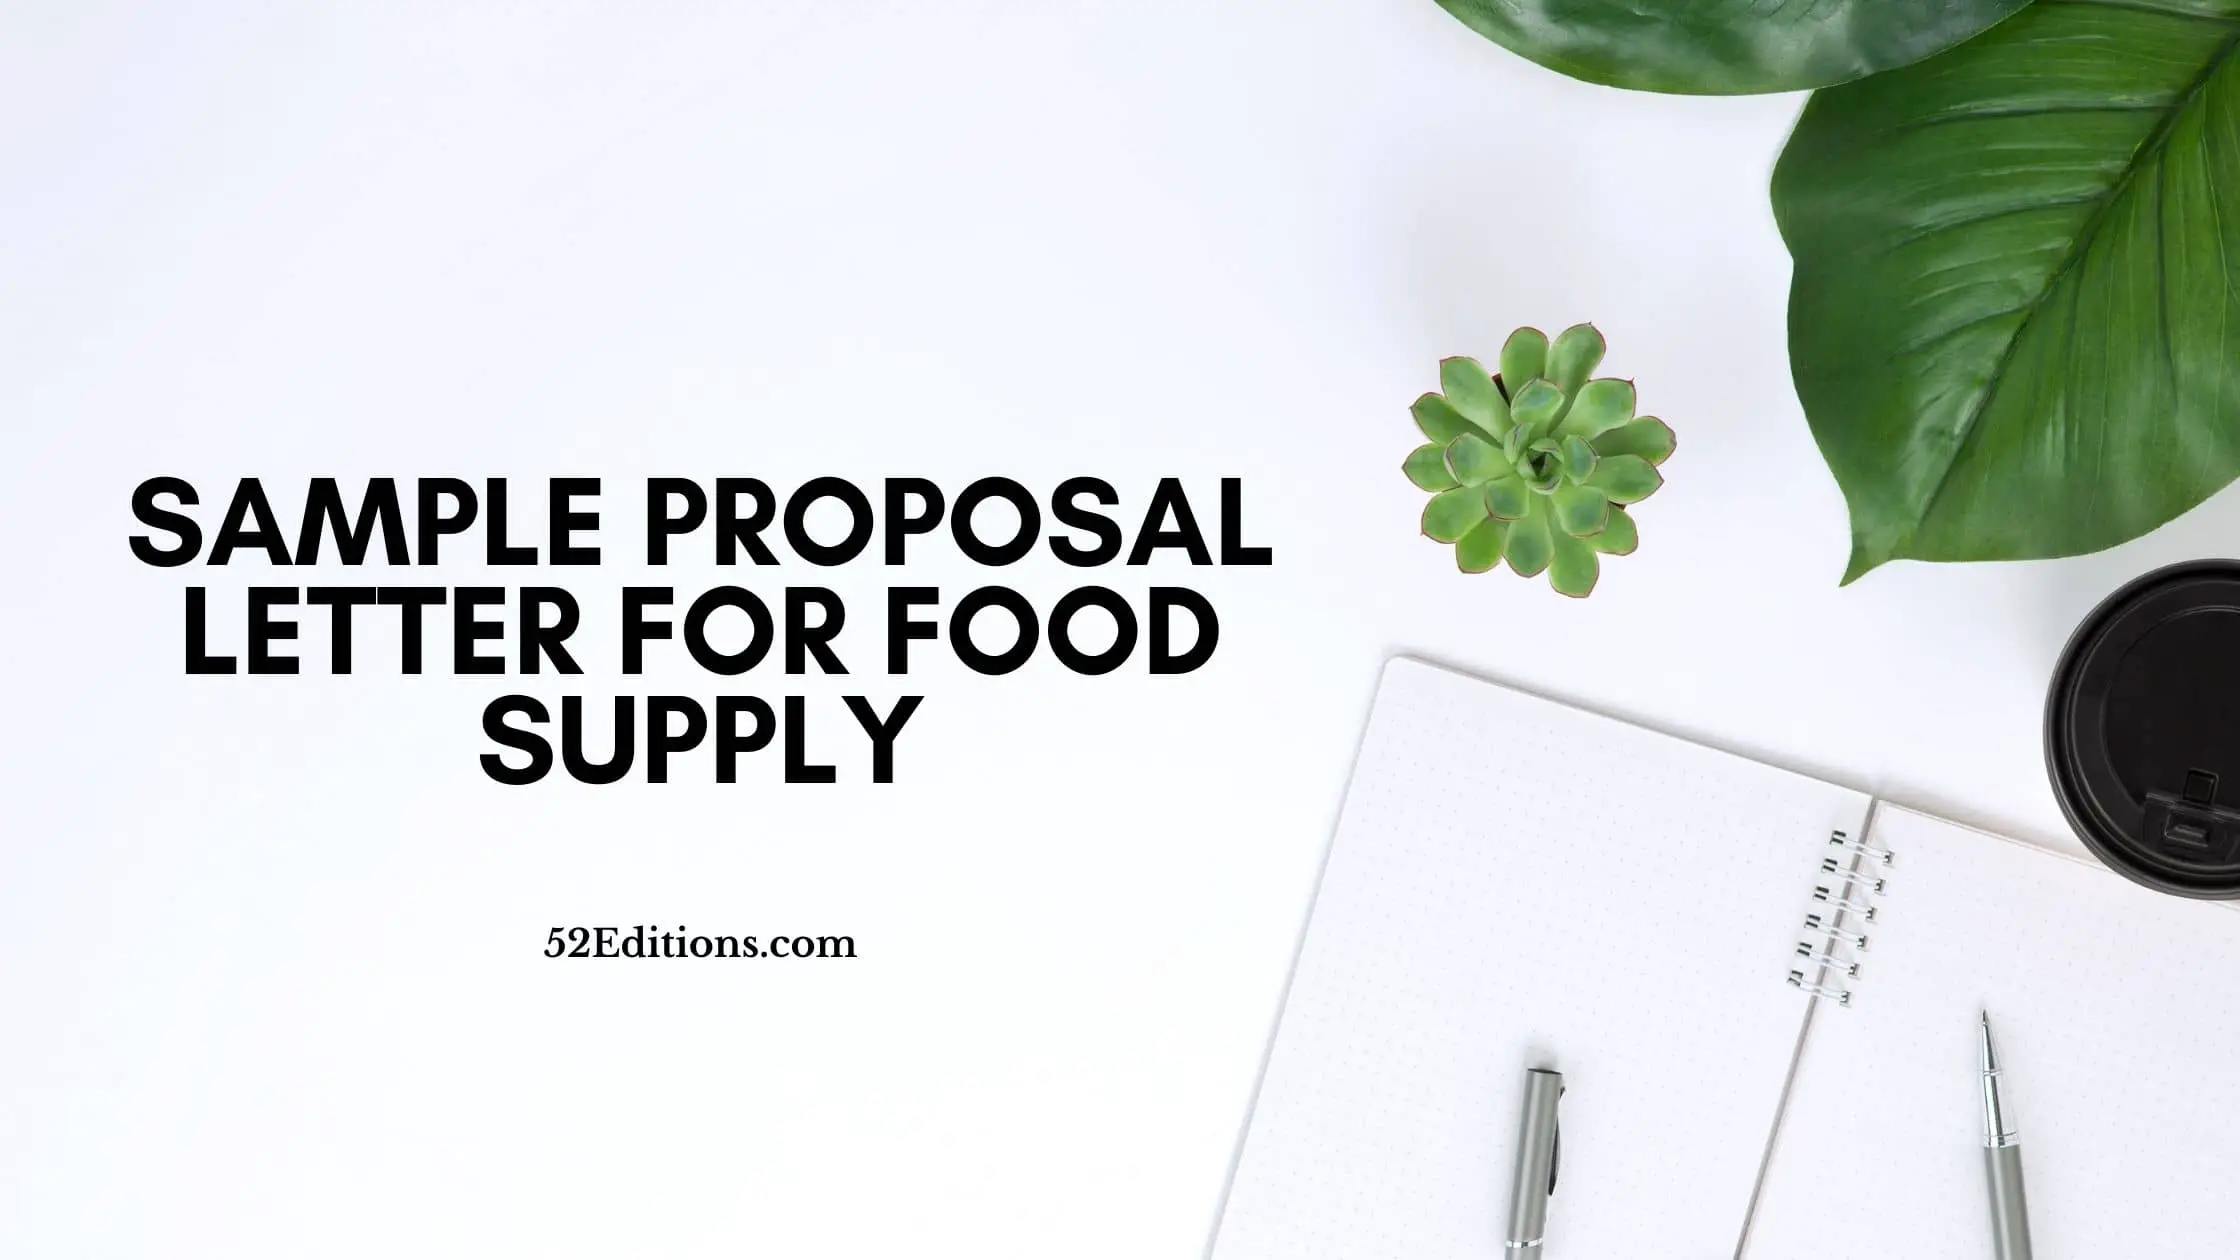 Sample Proposal Letter For Food Supply // FREE Letter Templates